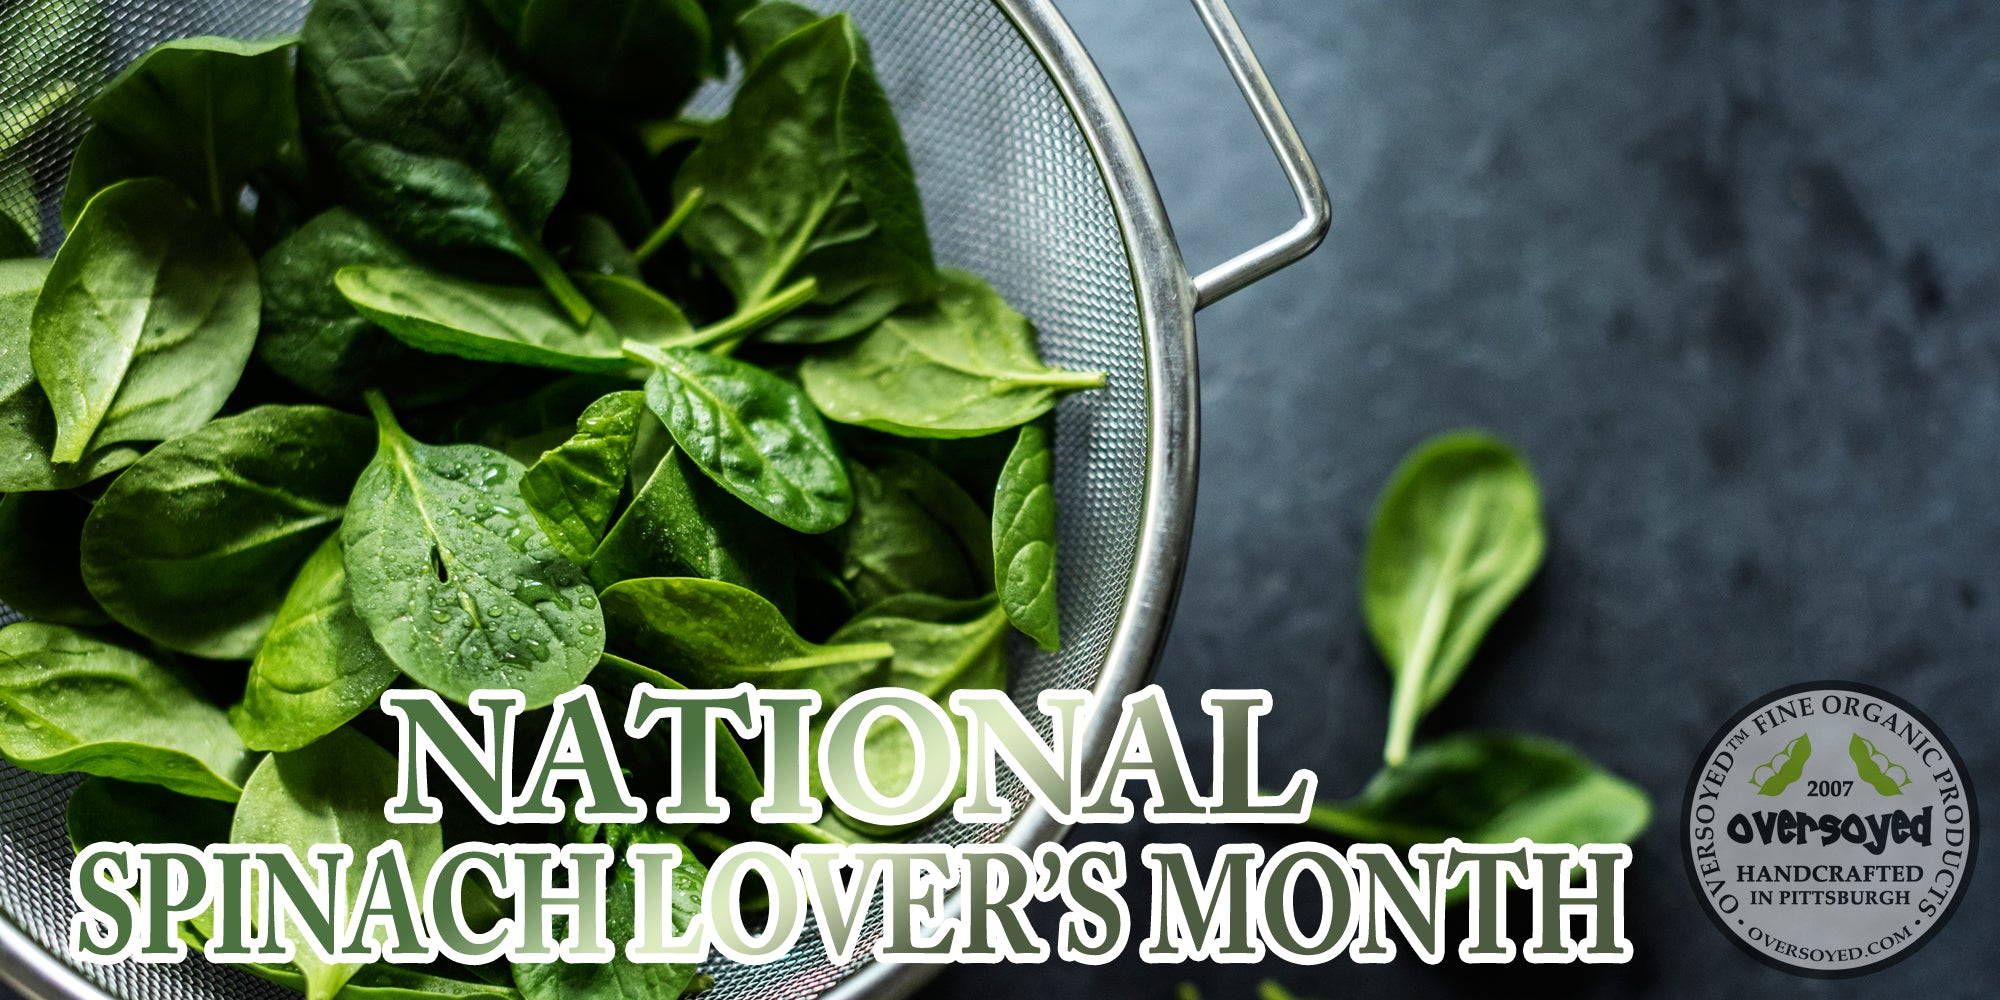 OverSoyed Fine Organic Products - National Spinach Lover's Month